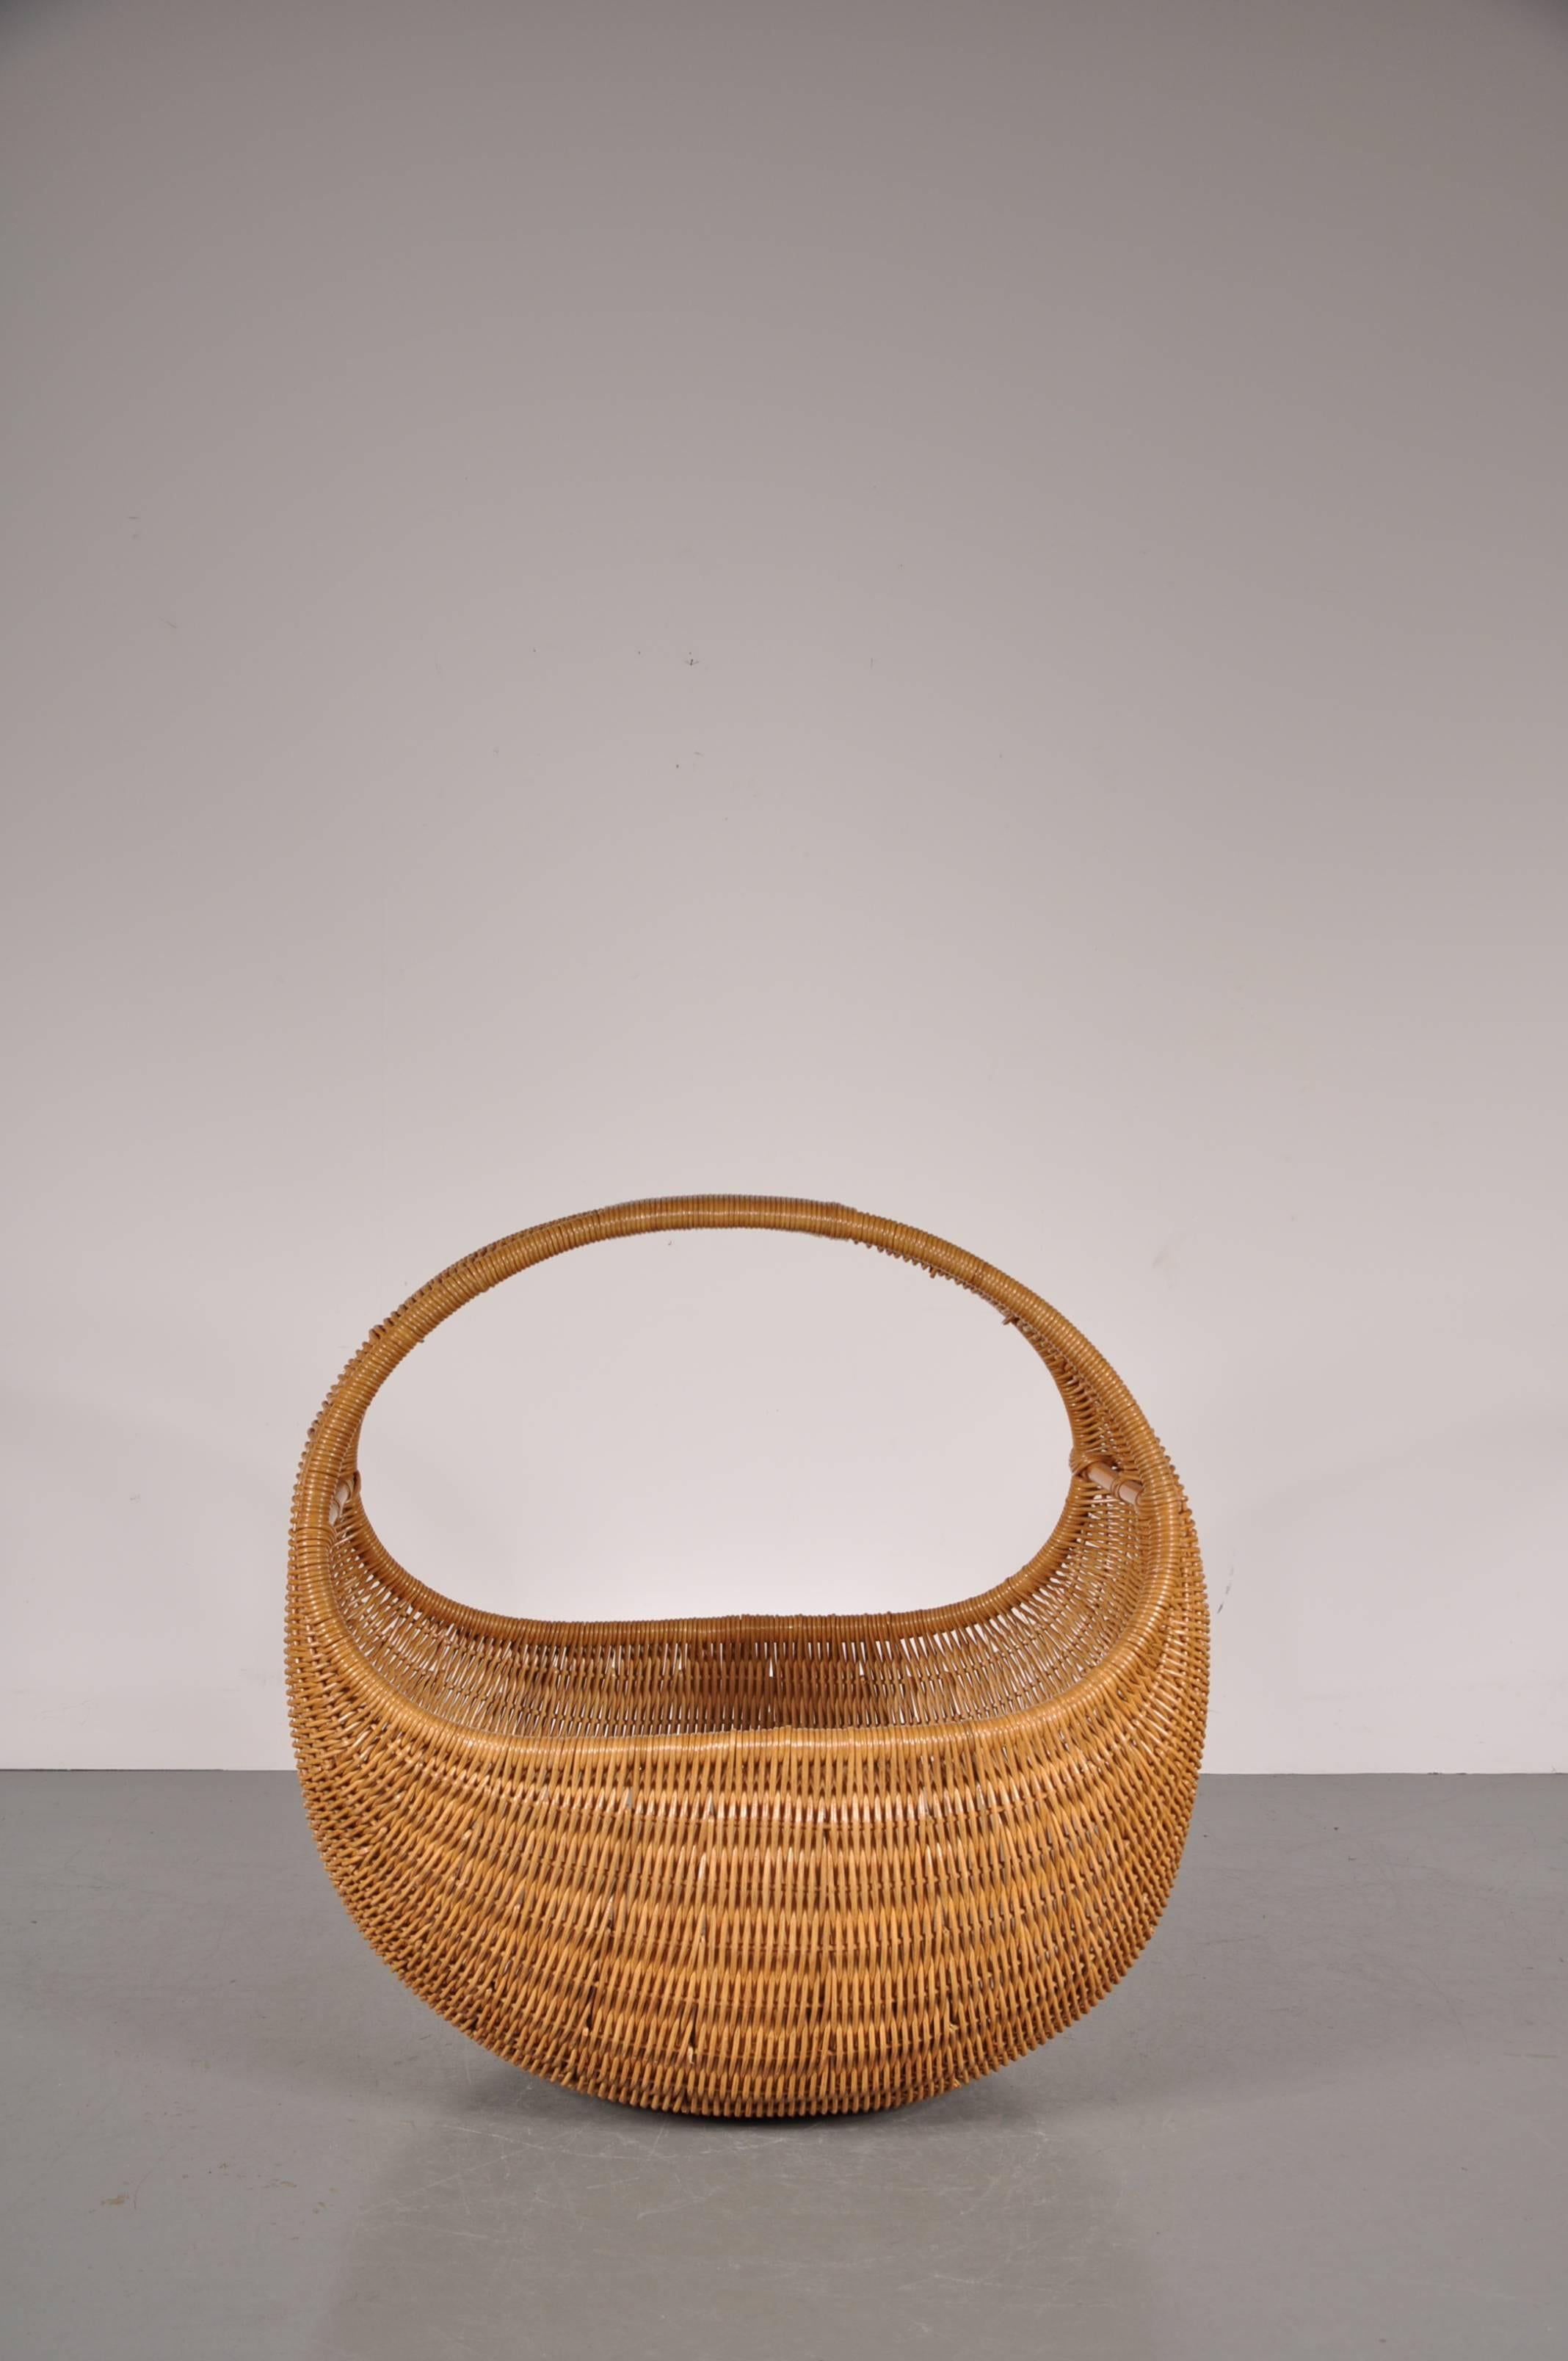 Unique baby basket by Dirk van Sliedrecht, manufactured for Rohé Netherlands around 1950.

The basket is very well made of high quality wicker. It has a comfortable white fabric cushion inside. This rare piece would make a beautiful addition to